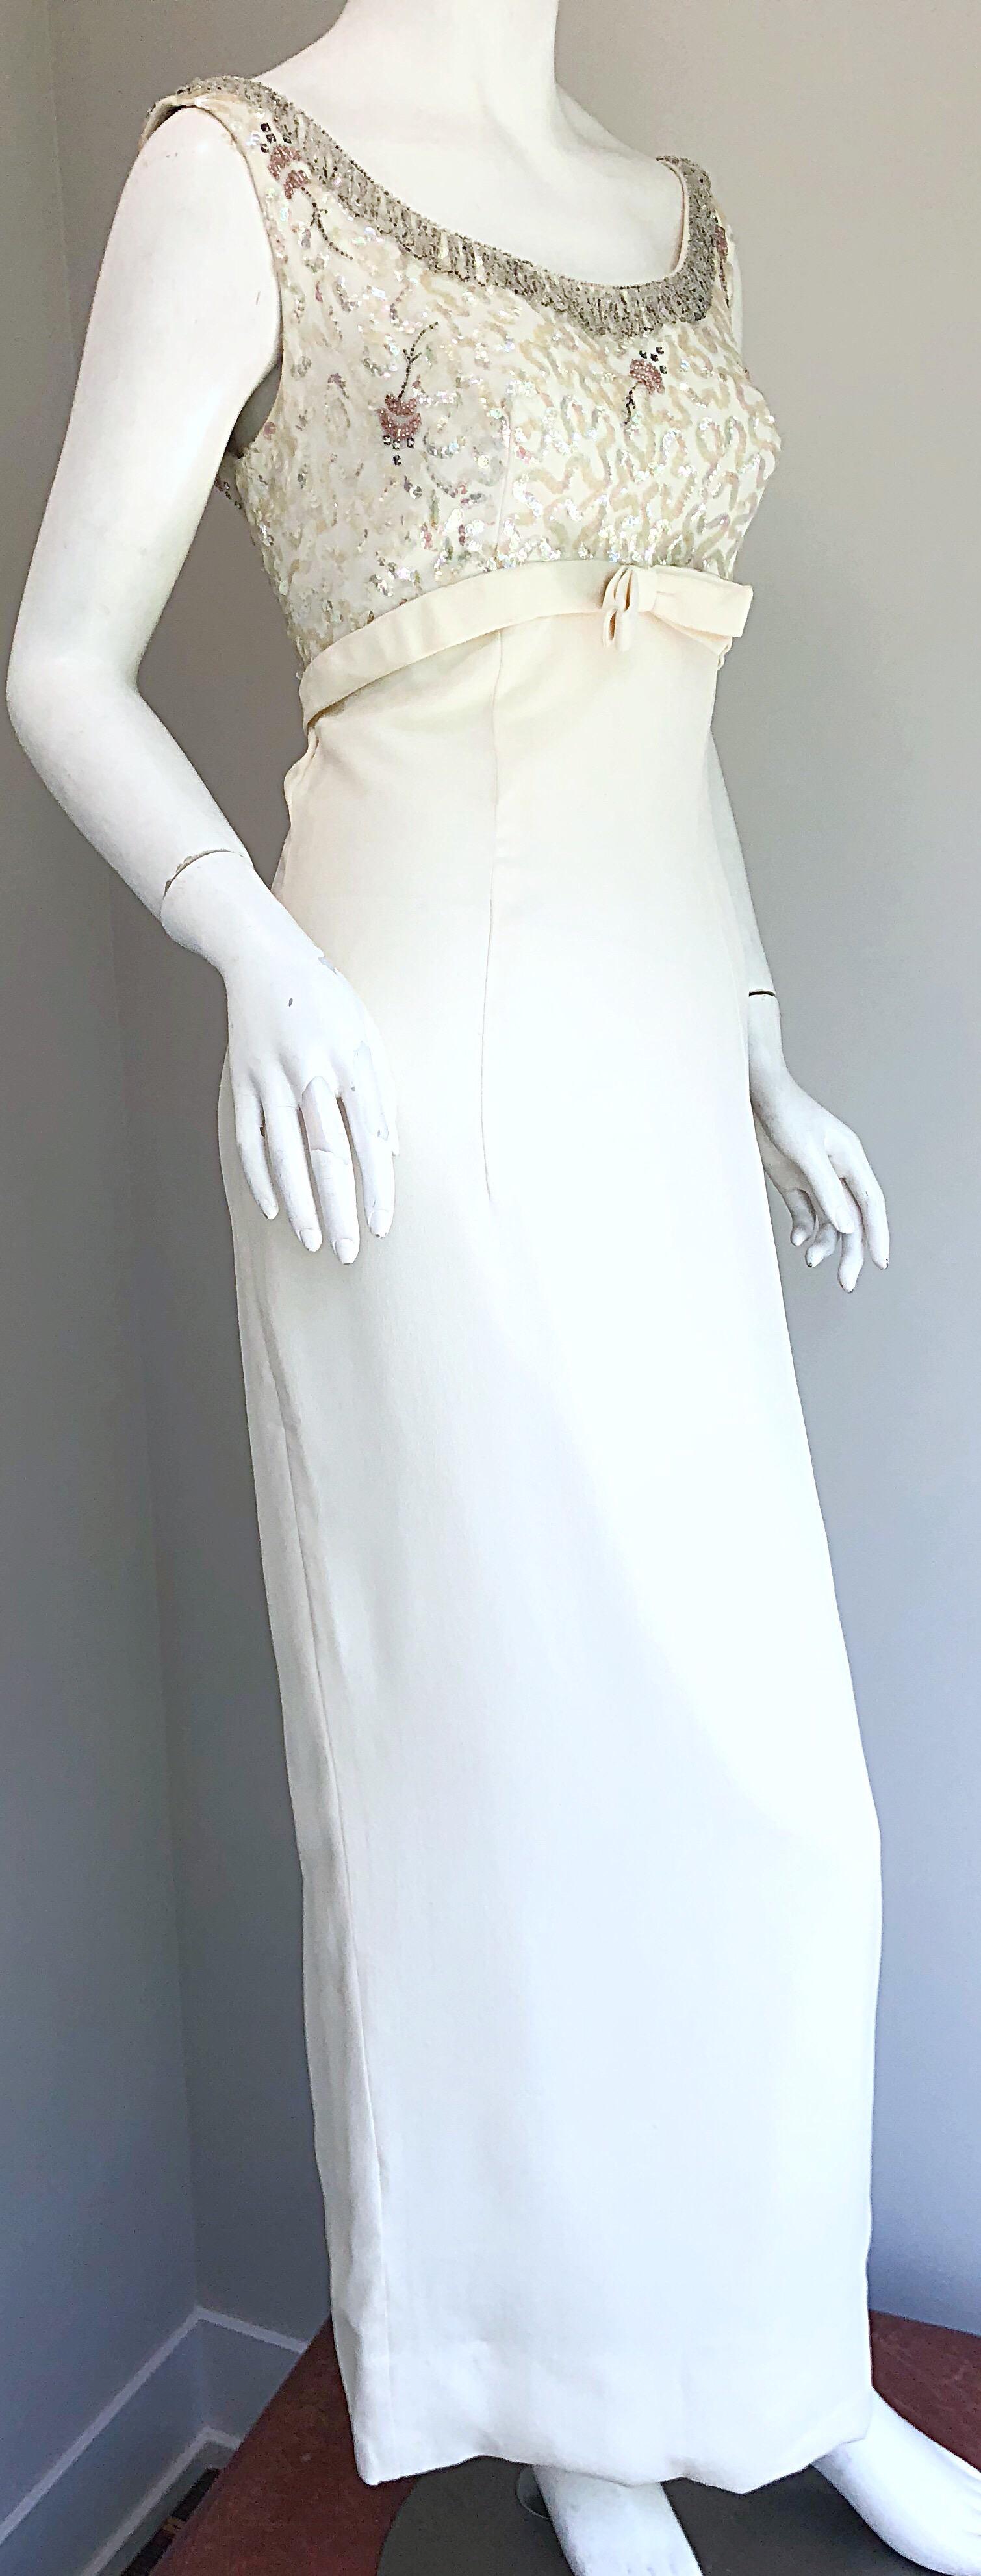 60s evening gown